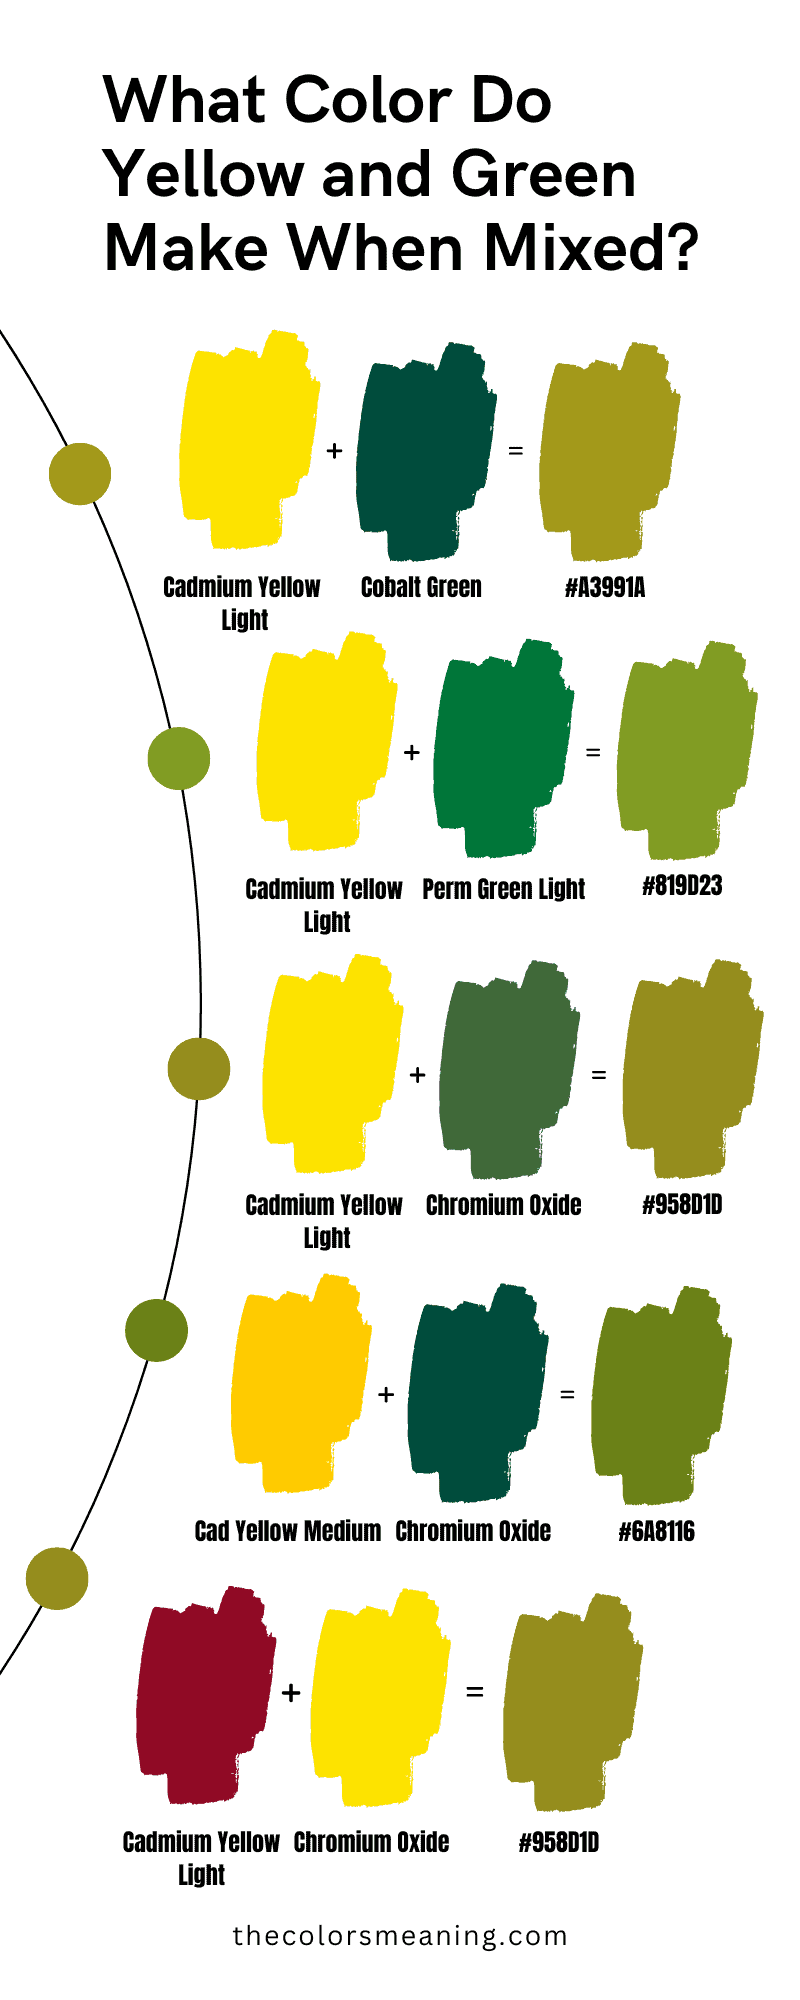 What color do green and yellow make when mixed